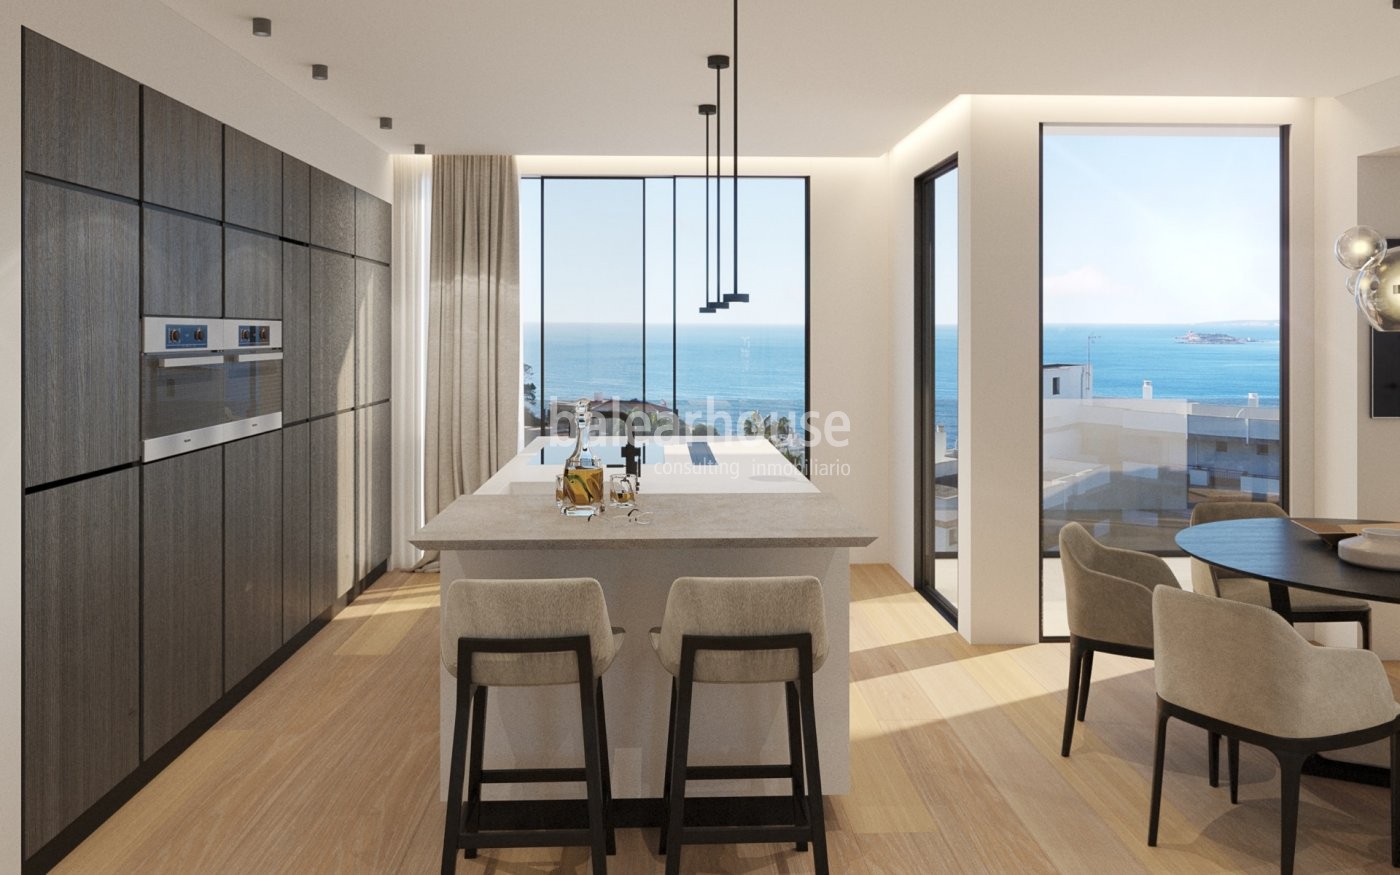 Spectacular flat of contemporary design open to dazzling sea views.